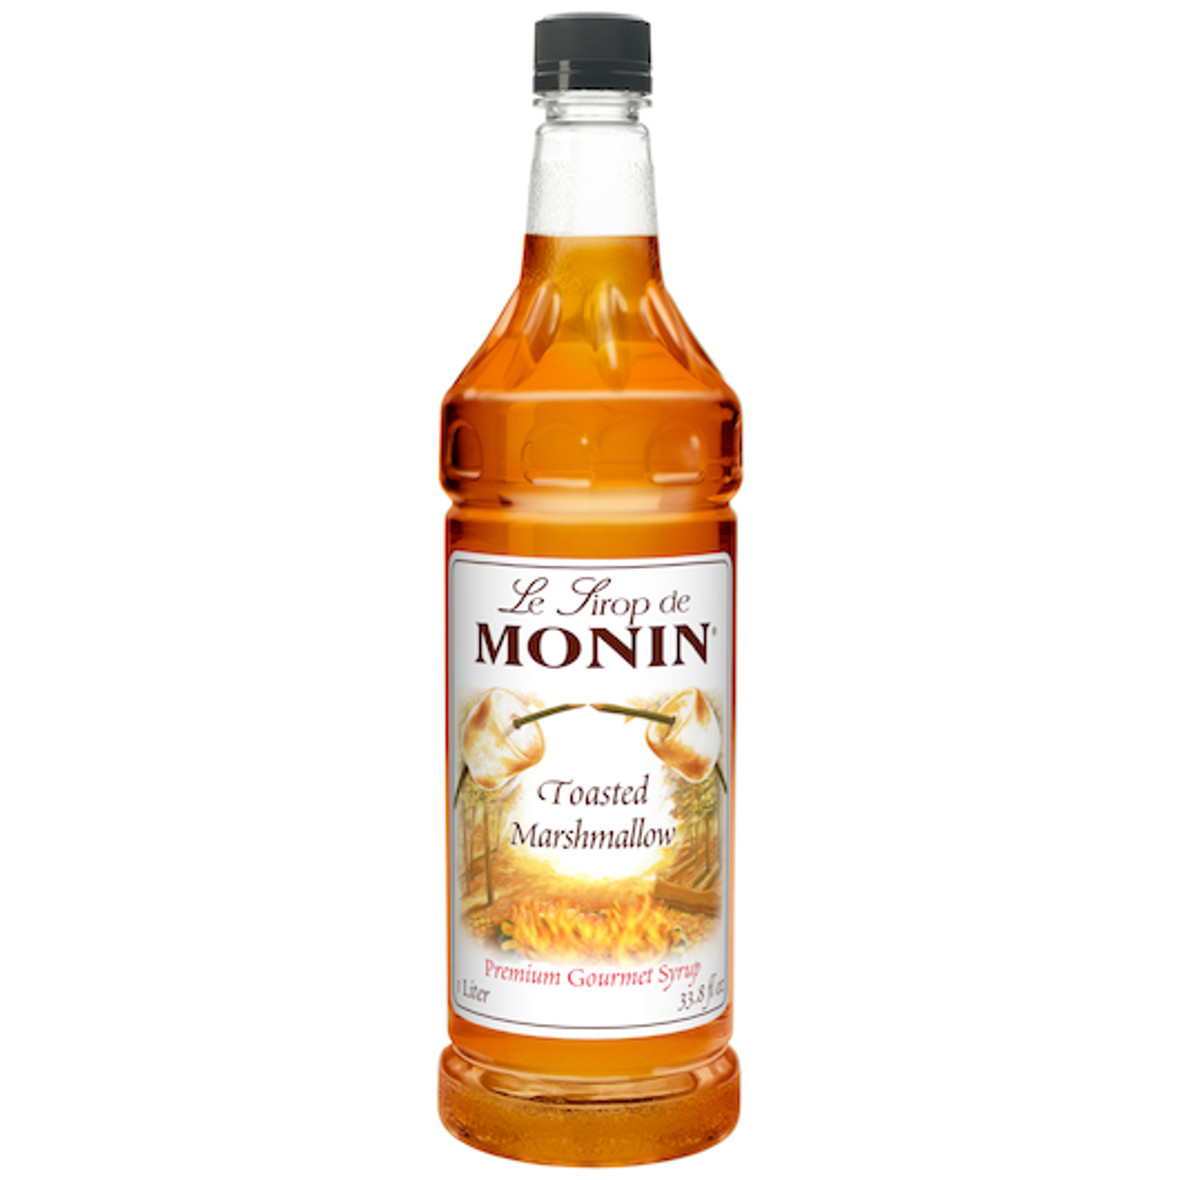 Monin Toasted Marshmallow Syrup, 1 Liter, 4 Per Case